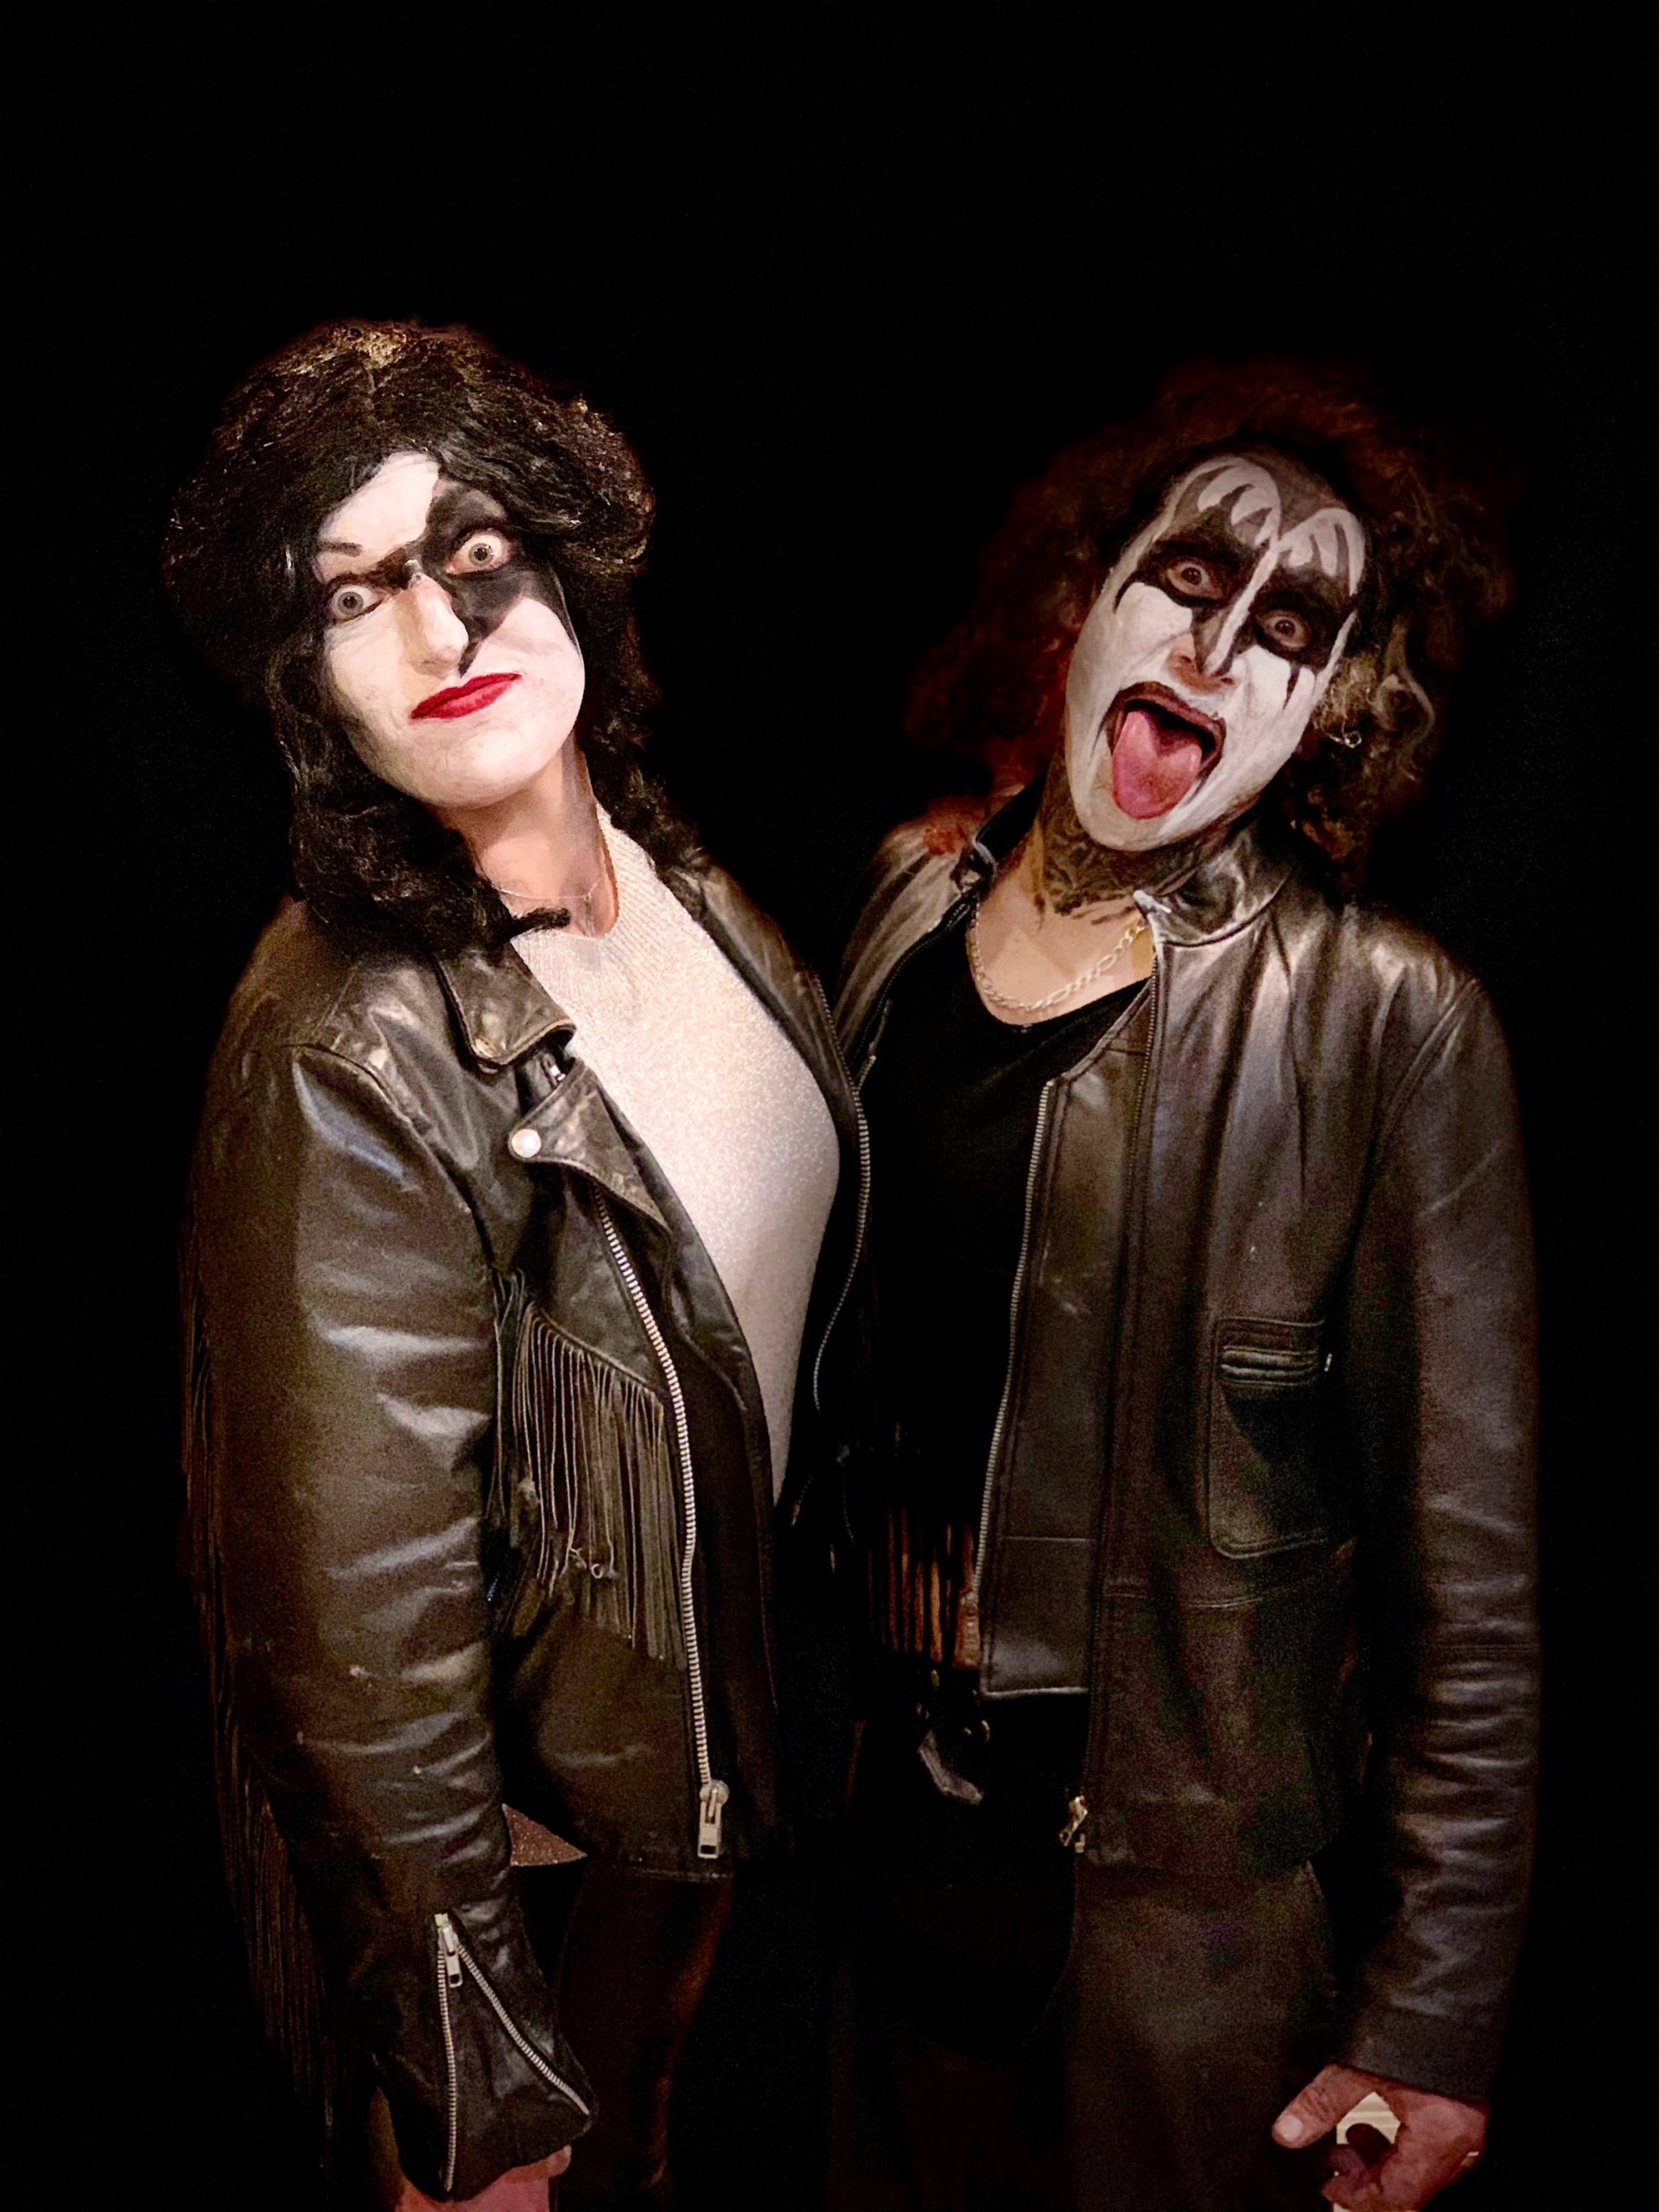 Cool Homemade KISS Simmons and the Star Child Couple Costume